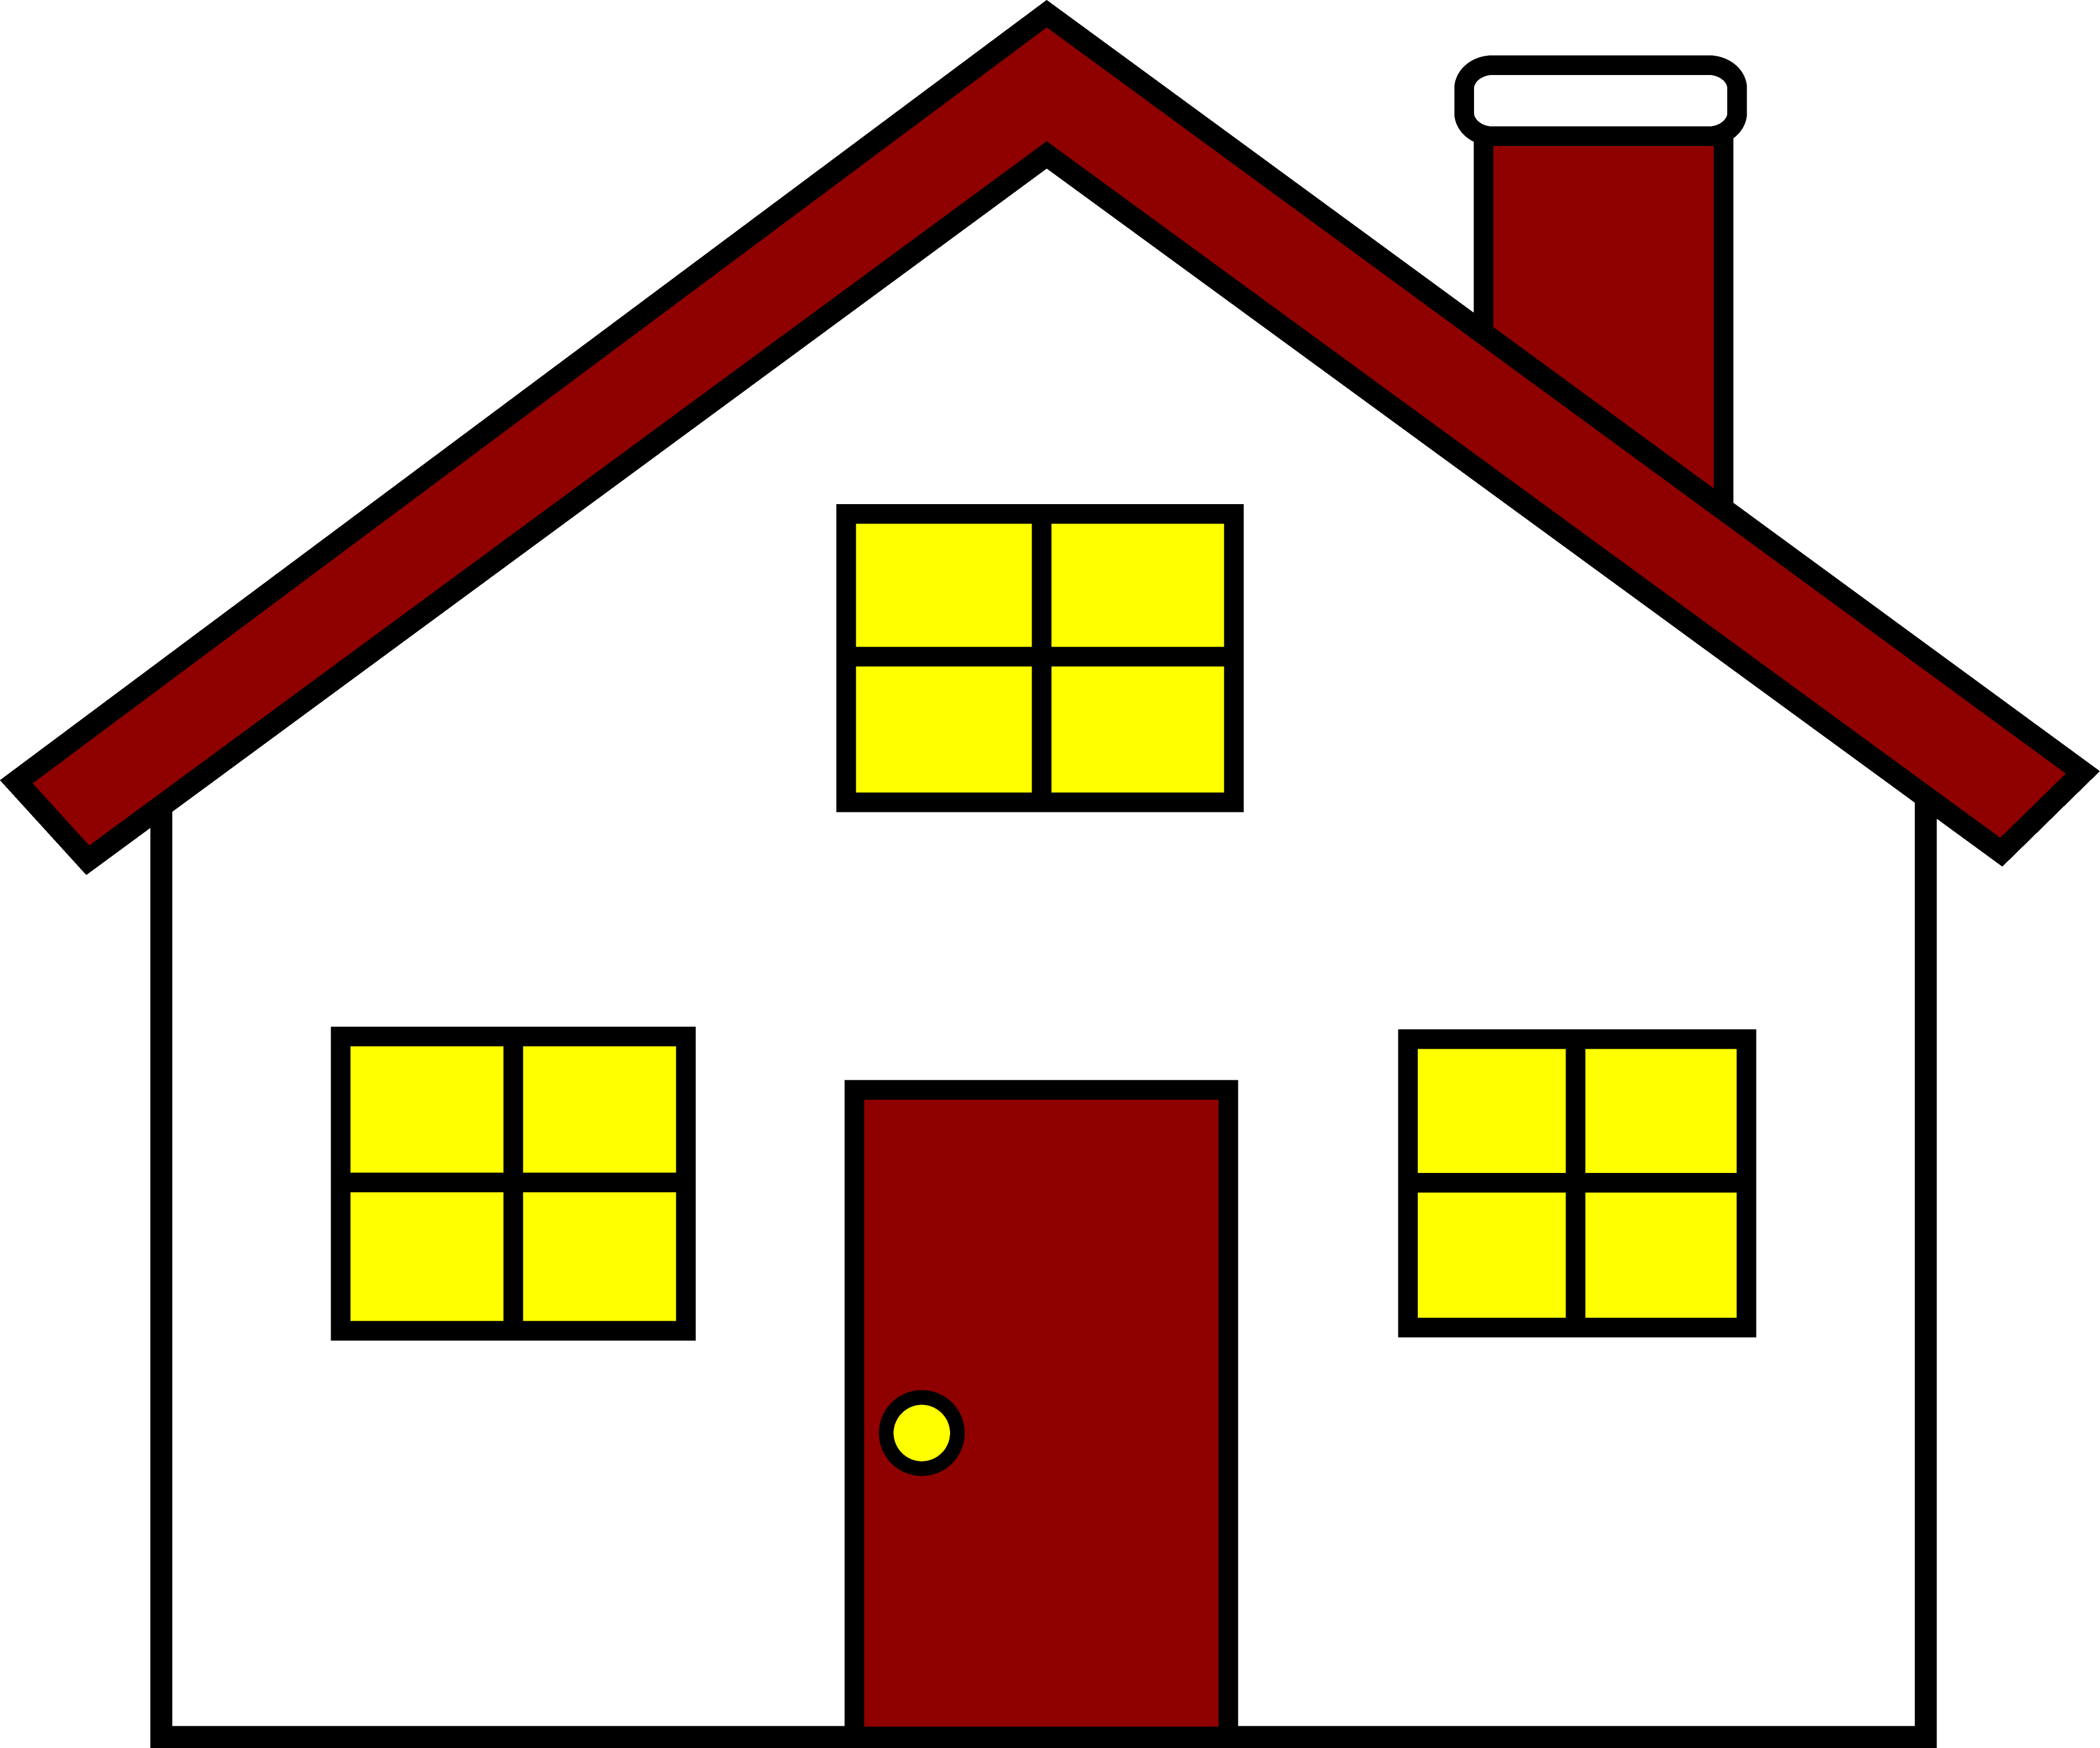 house clipart - House Clipart Free